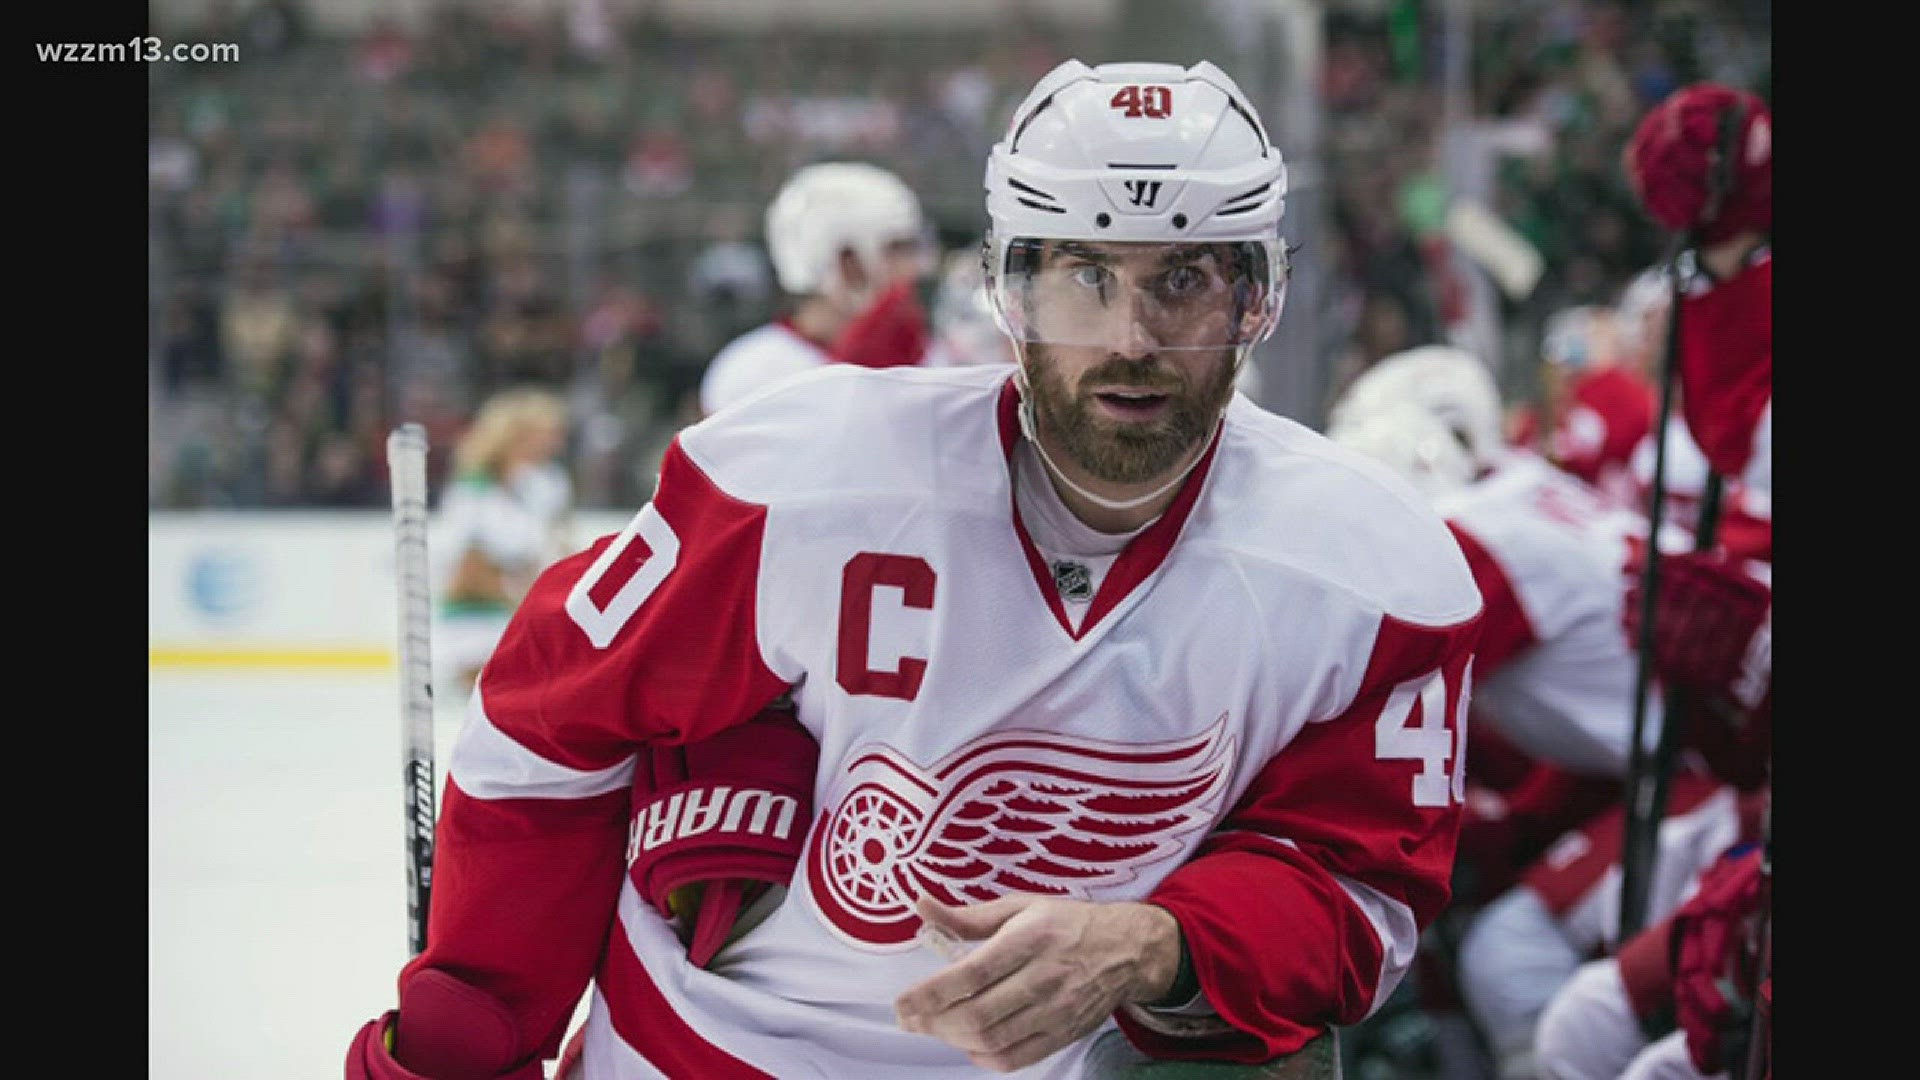 Career ends for Red Wings captain